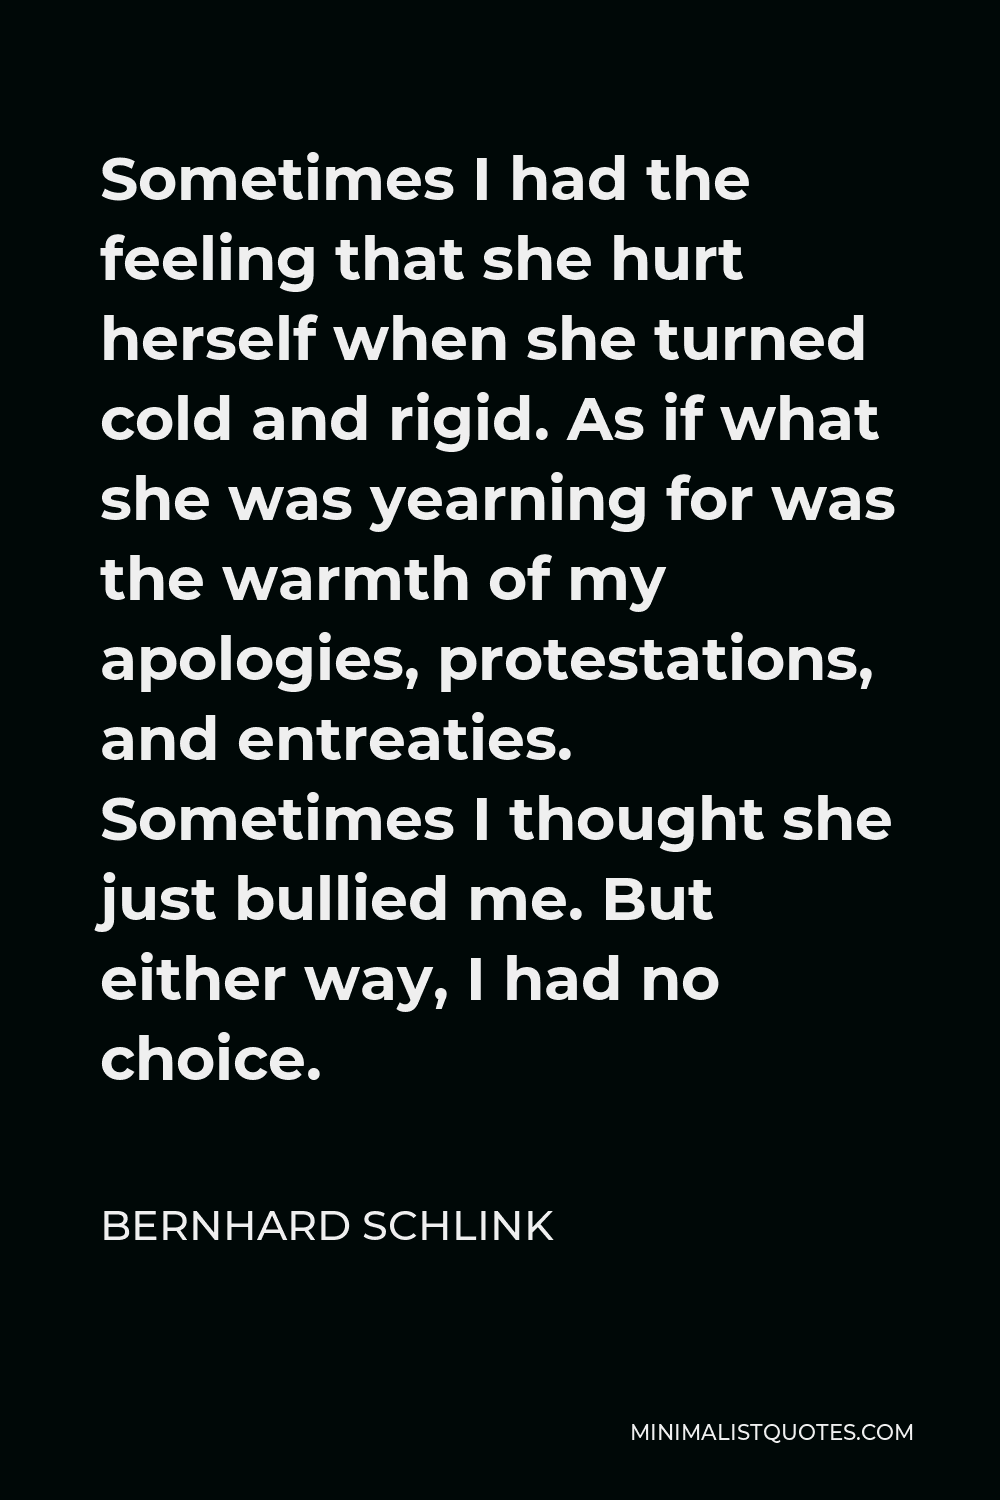 Bernhard Schlink Quote - Sometimes I had the feeling that she hurt herself when she turned cold and rigid. As if what she was yearning for was the warmth of my apologies, protestations, and entreaties. Sometimes I thought she just bullied me. But either way, I had no choice.